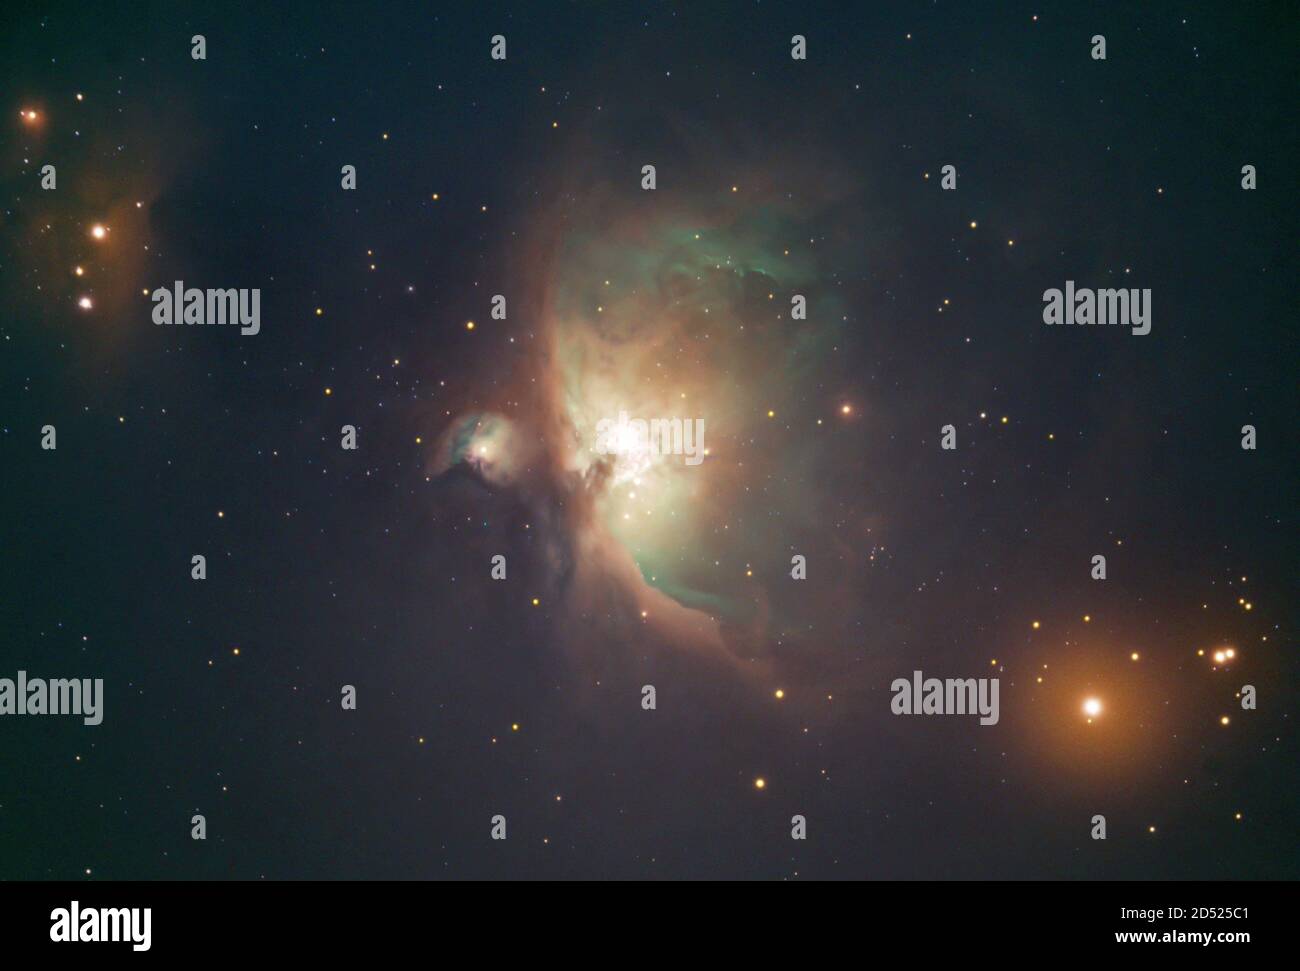 The Orion Nebula, M42, and one of the brightest nebulae in the night sky photographed from London in false colour palette, a diffuse nebula. Taken 10th October 2020 with multiple long exposures on standard Nikon Z7 camera and 5 inch refracting telescope. Also visible is M43 to left of main nebula and (top left) NGC 1977, The Running Man Nebula. The star lower right is double star Nair al Saif. The Orion Nebula is approx 1,600 light years from planet Earth. Credit: Malcolm Park/Alamy. Stock Photo